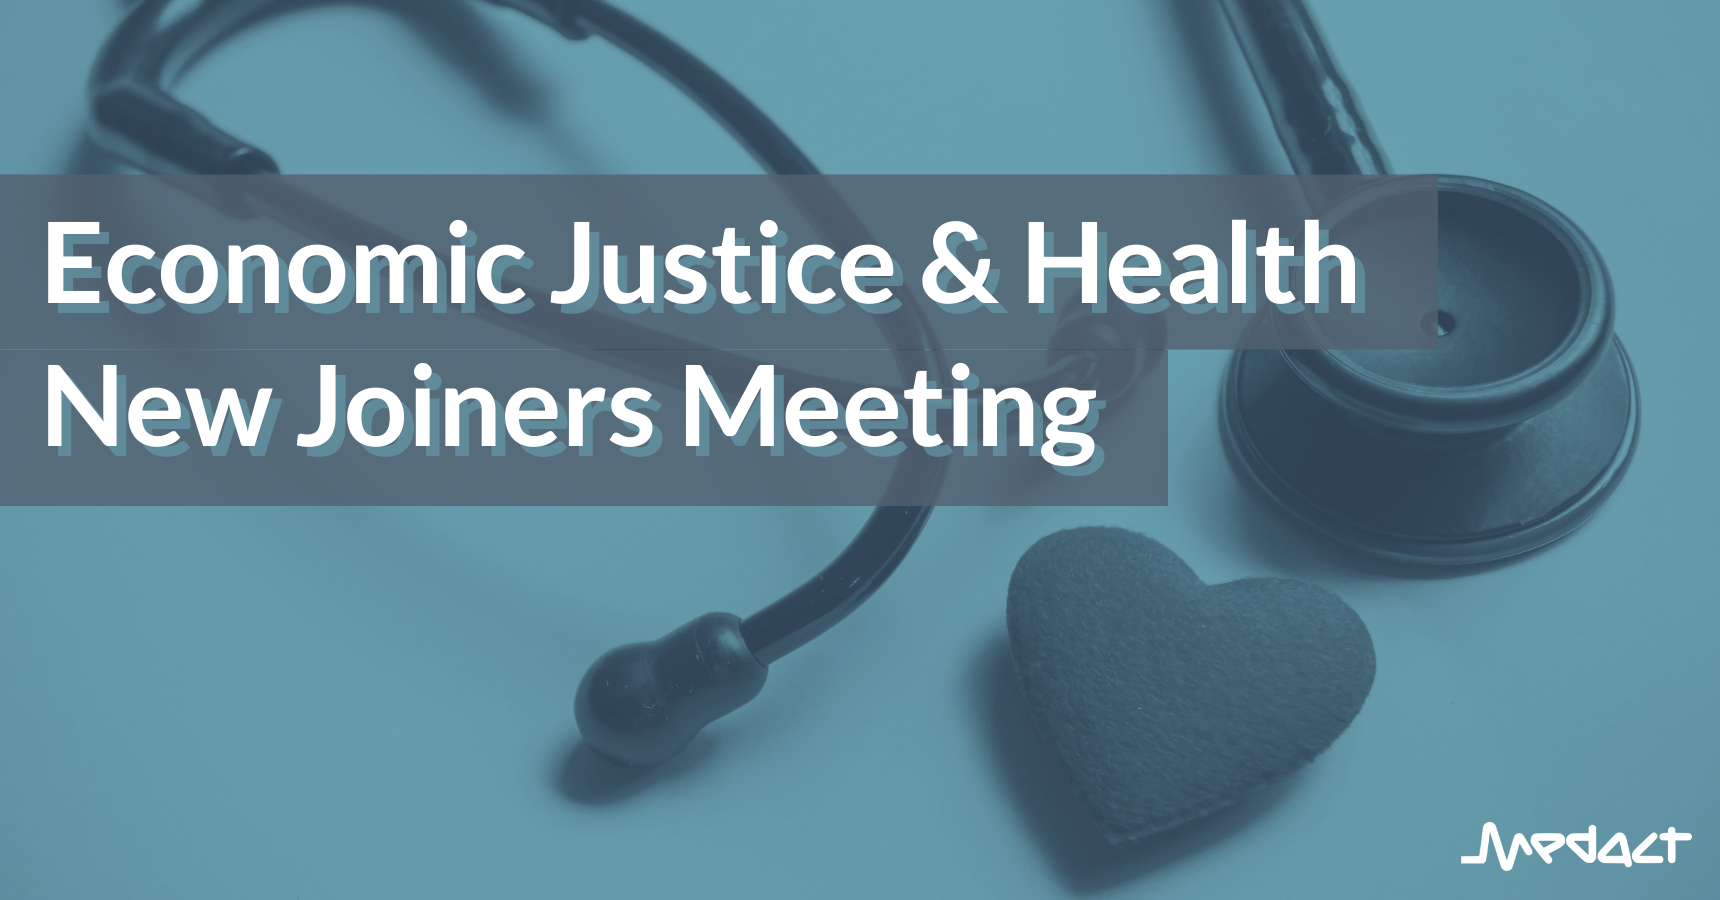 Economic Justice & Health New Joiners Meeting